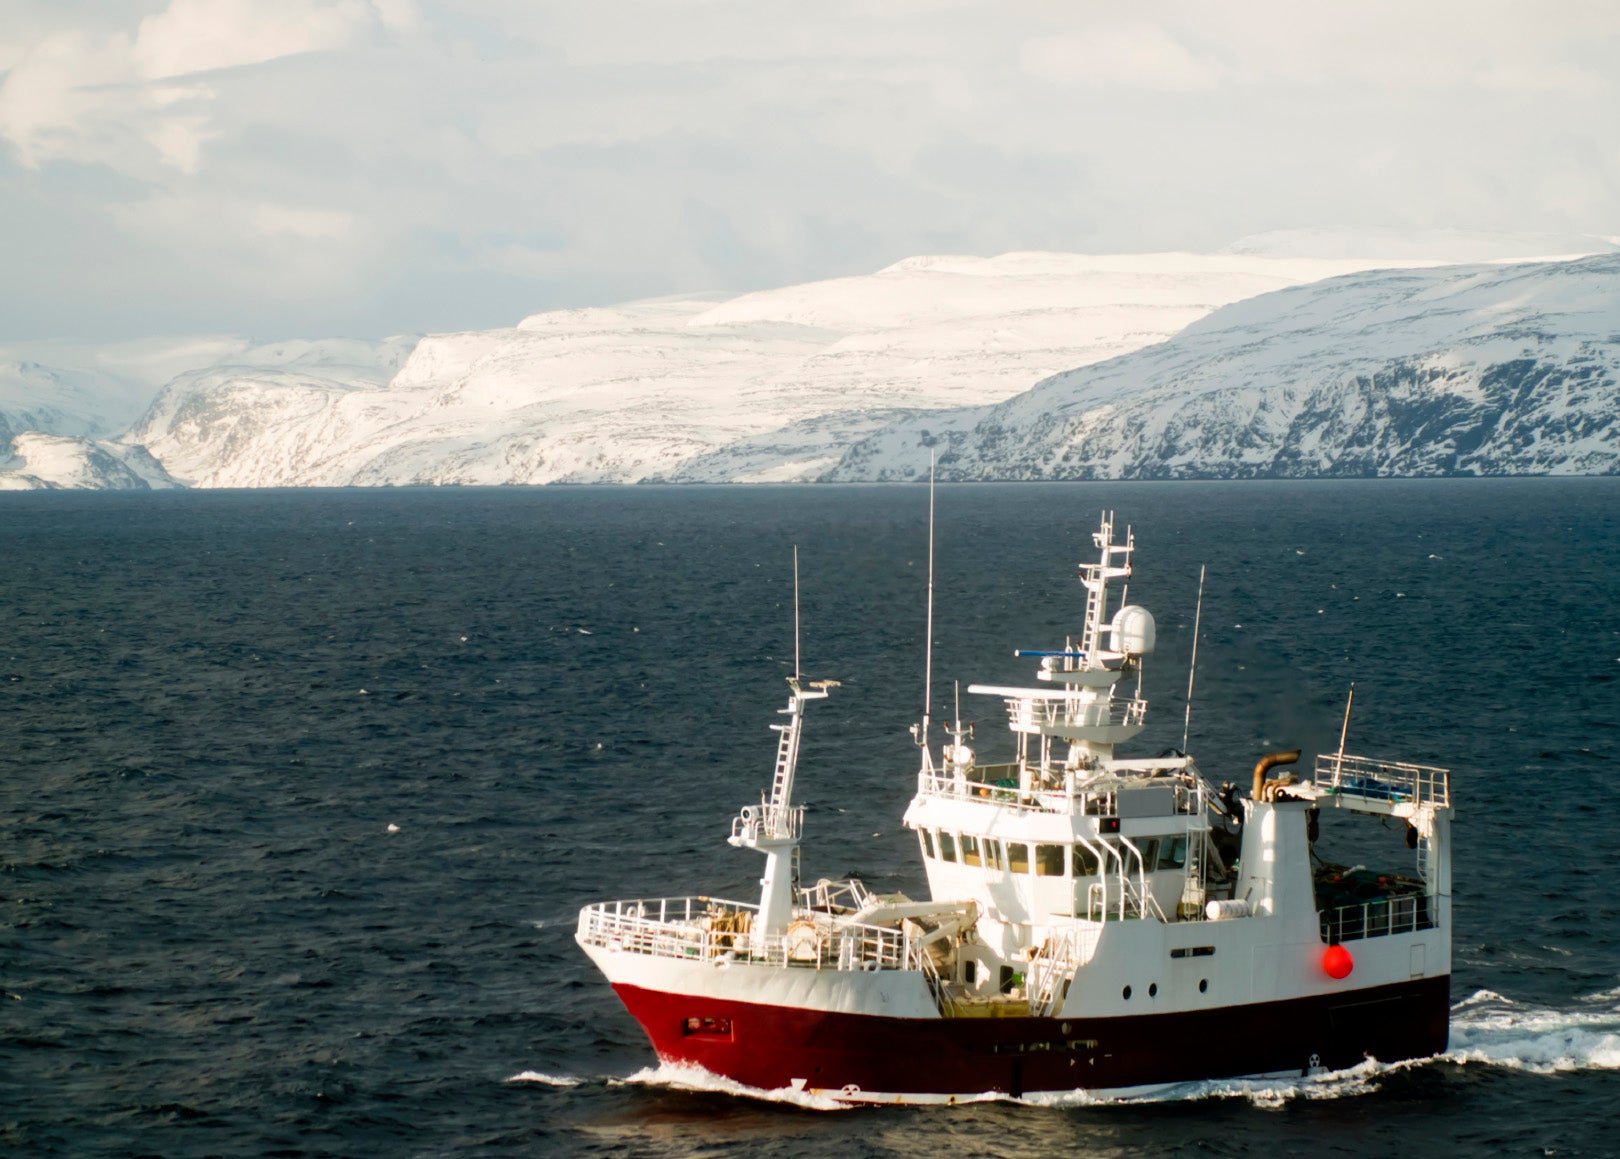 A fishing boat on the Barents Sea off the coast of Norway.